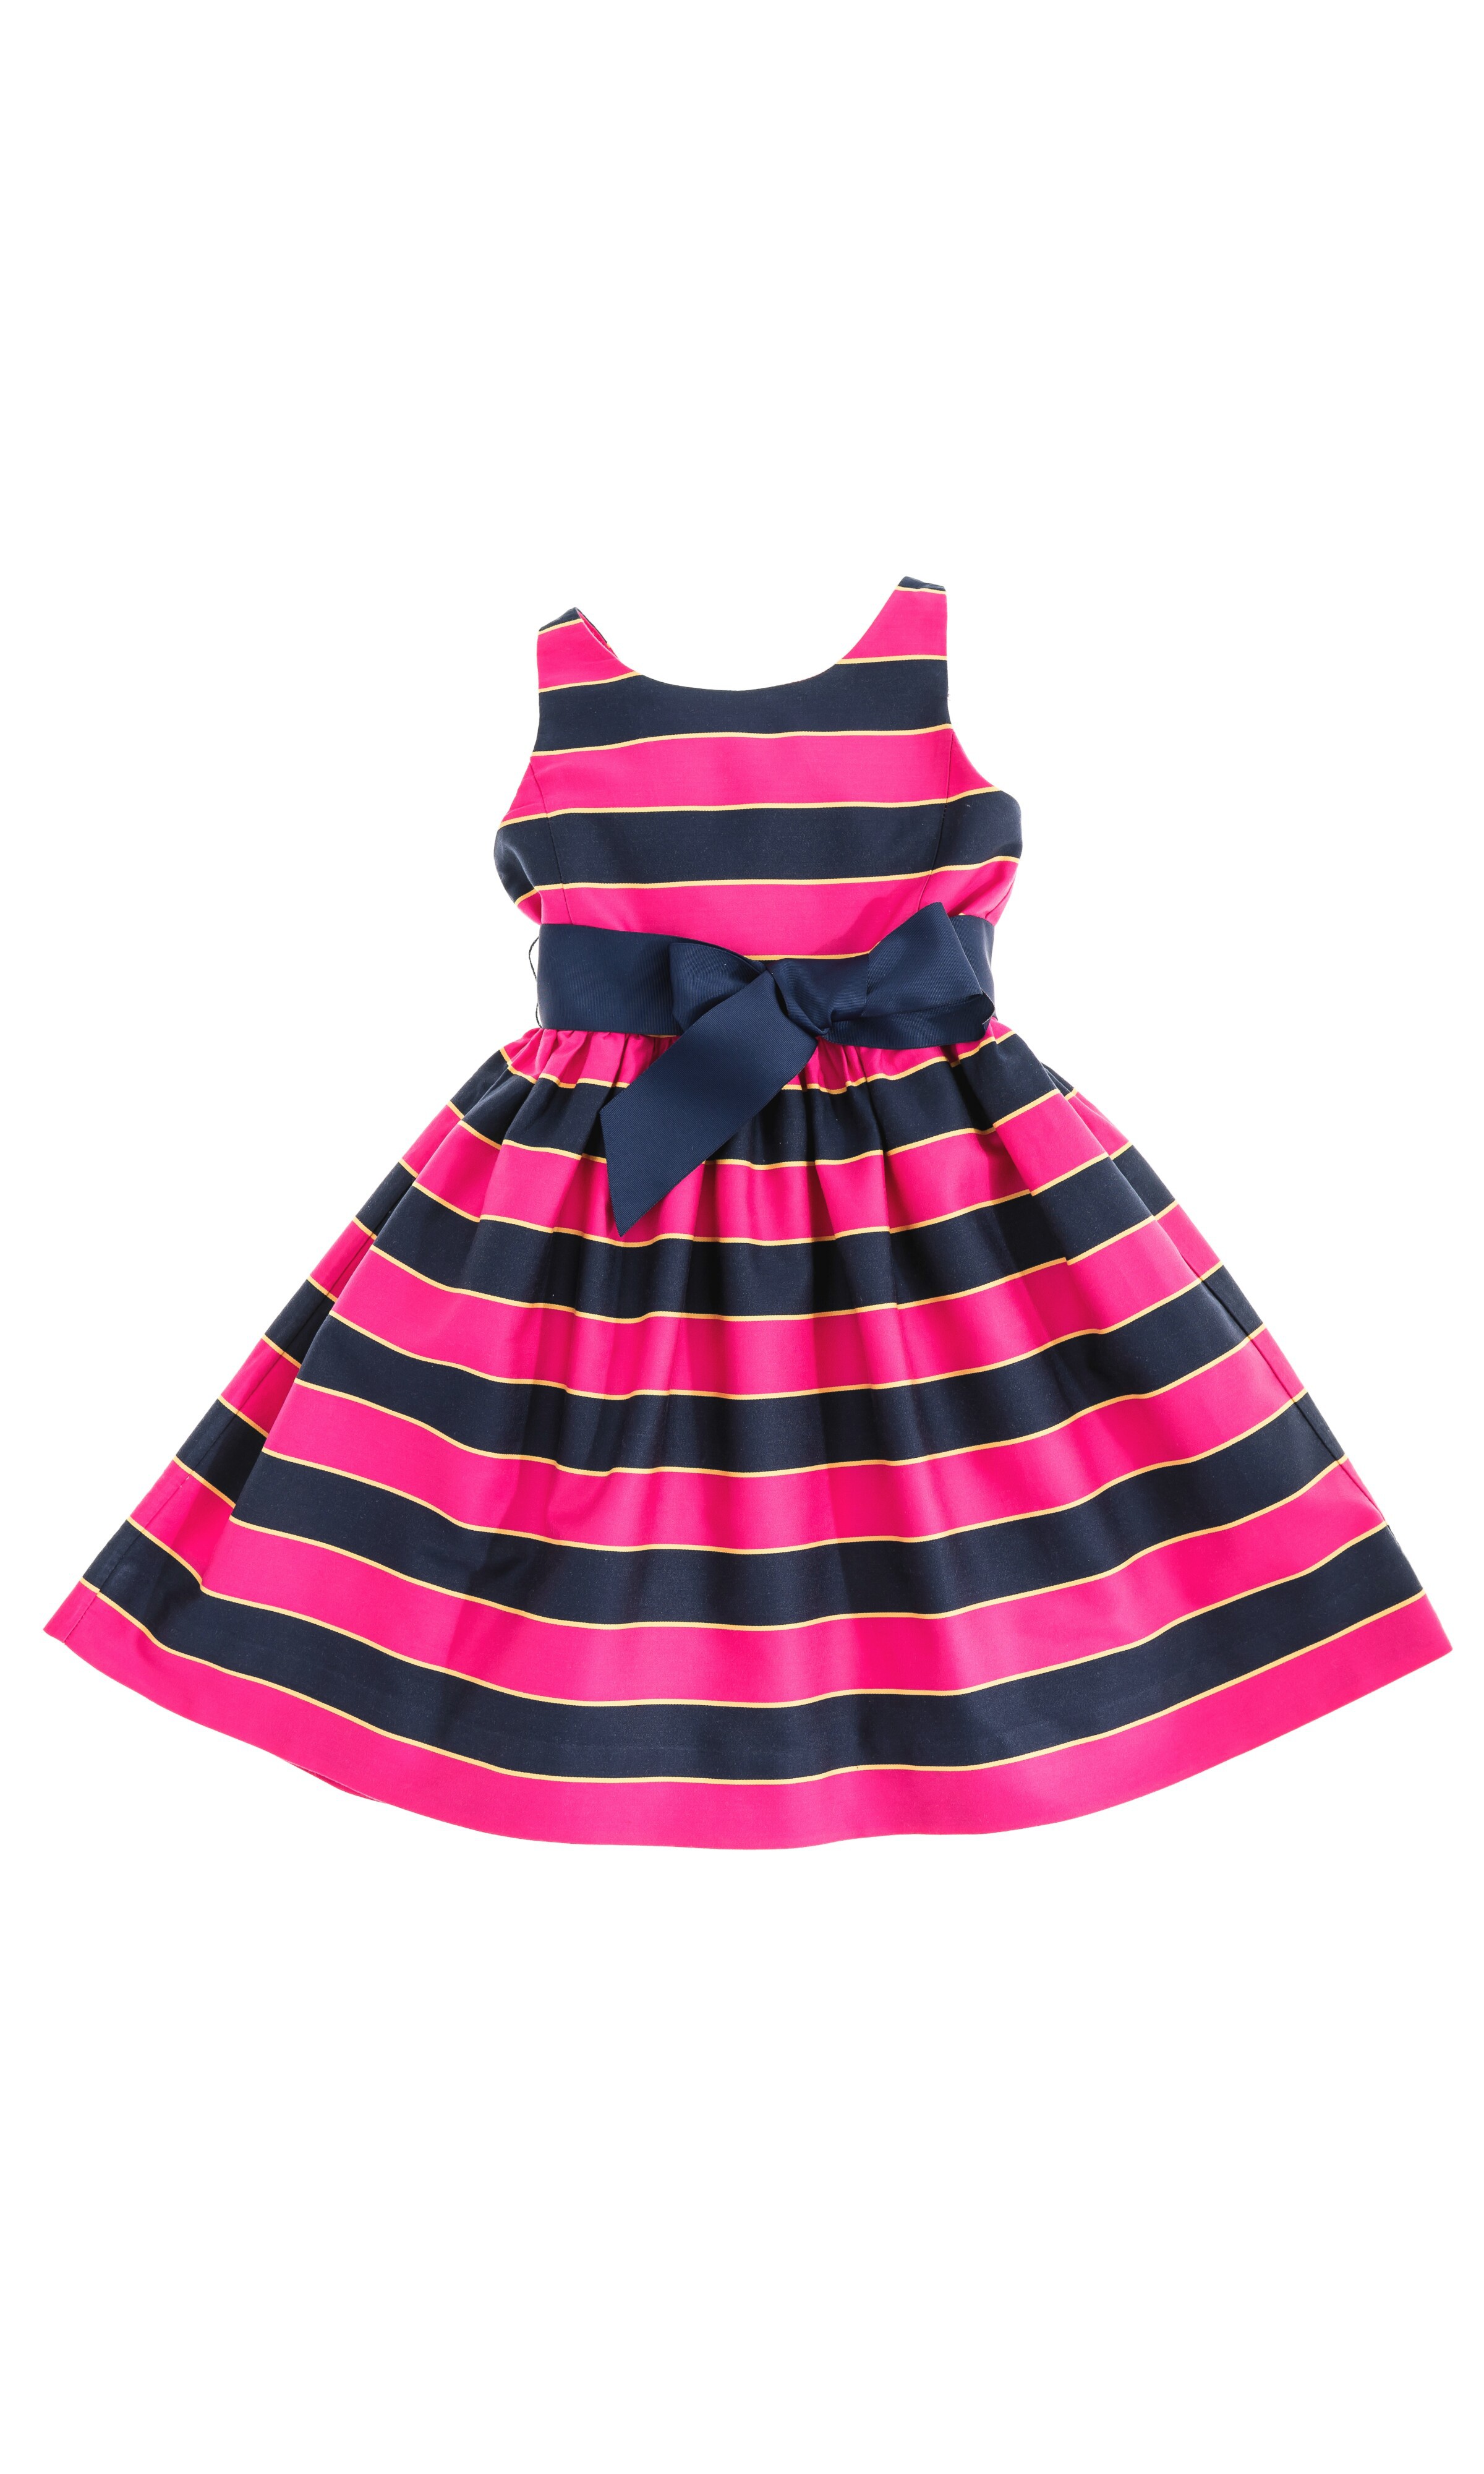 Pink-and-navy blue striped dress, Polo Ralph Lauren - Celebrity Club